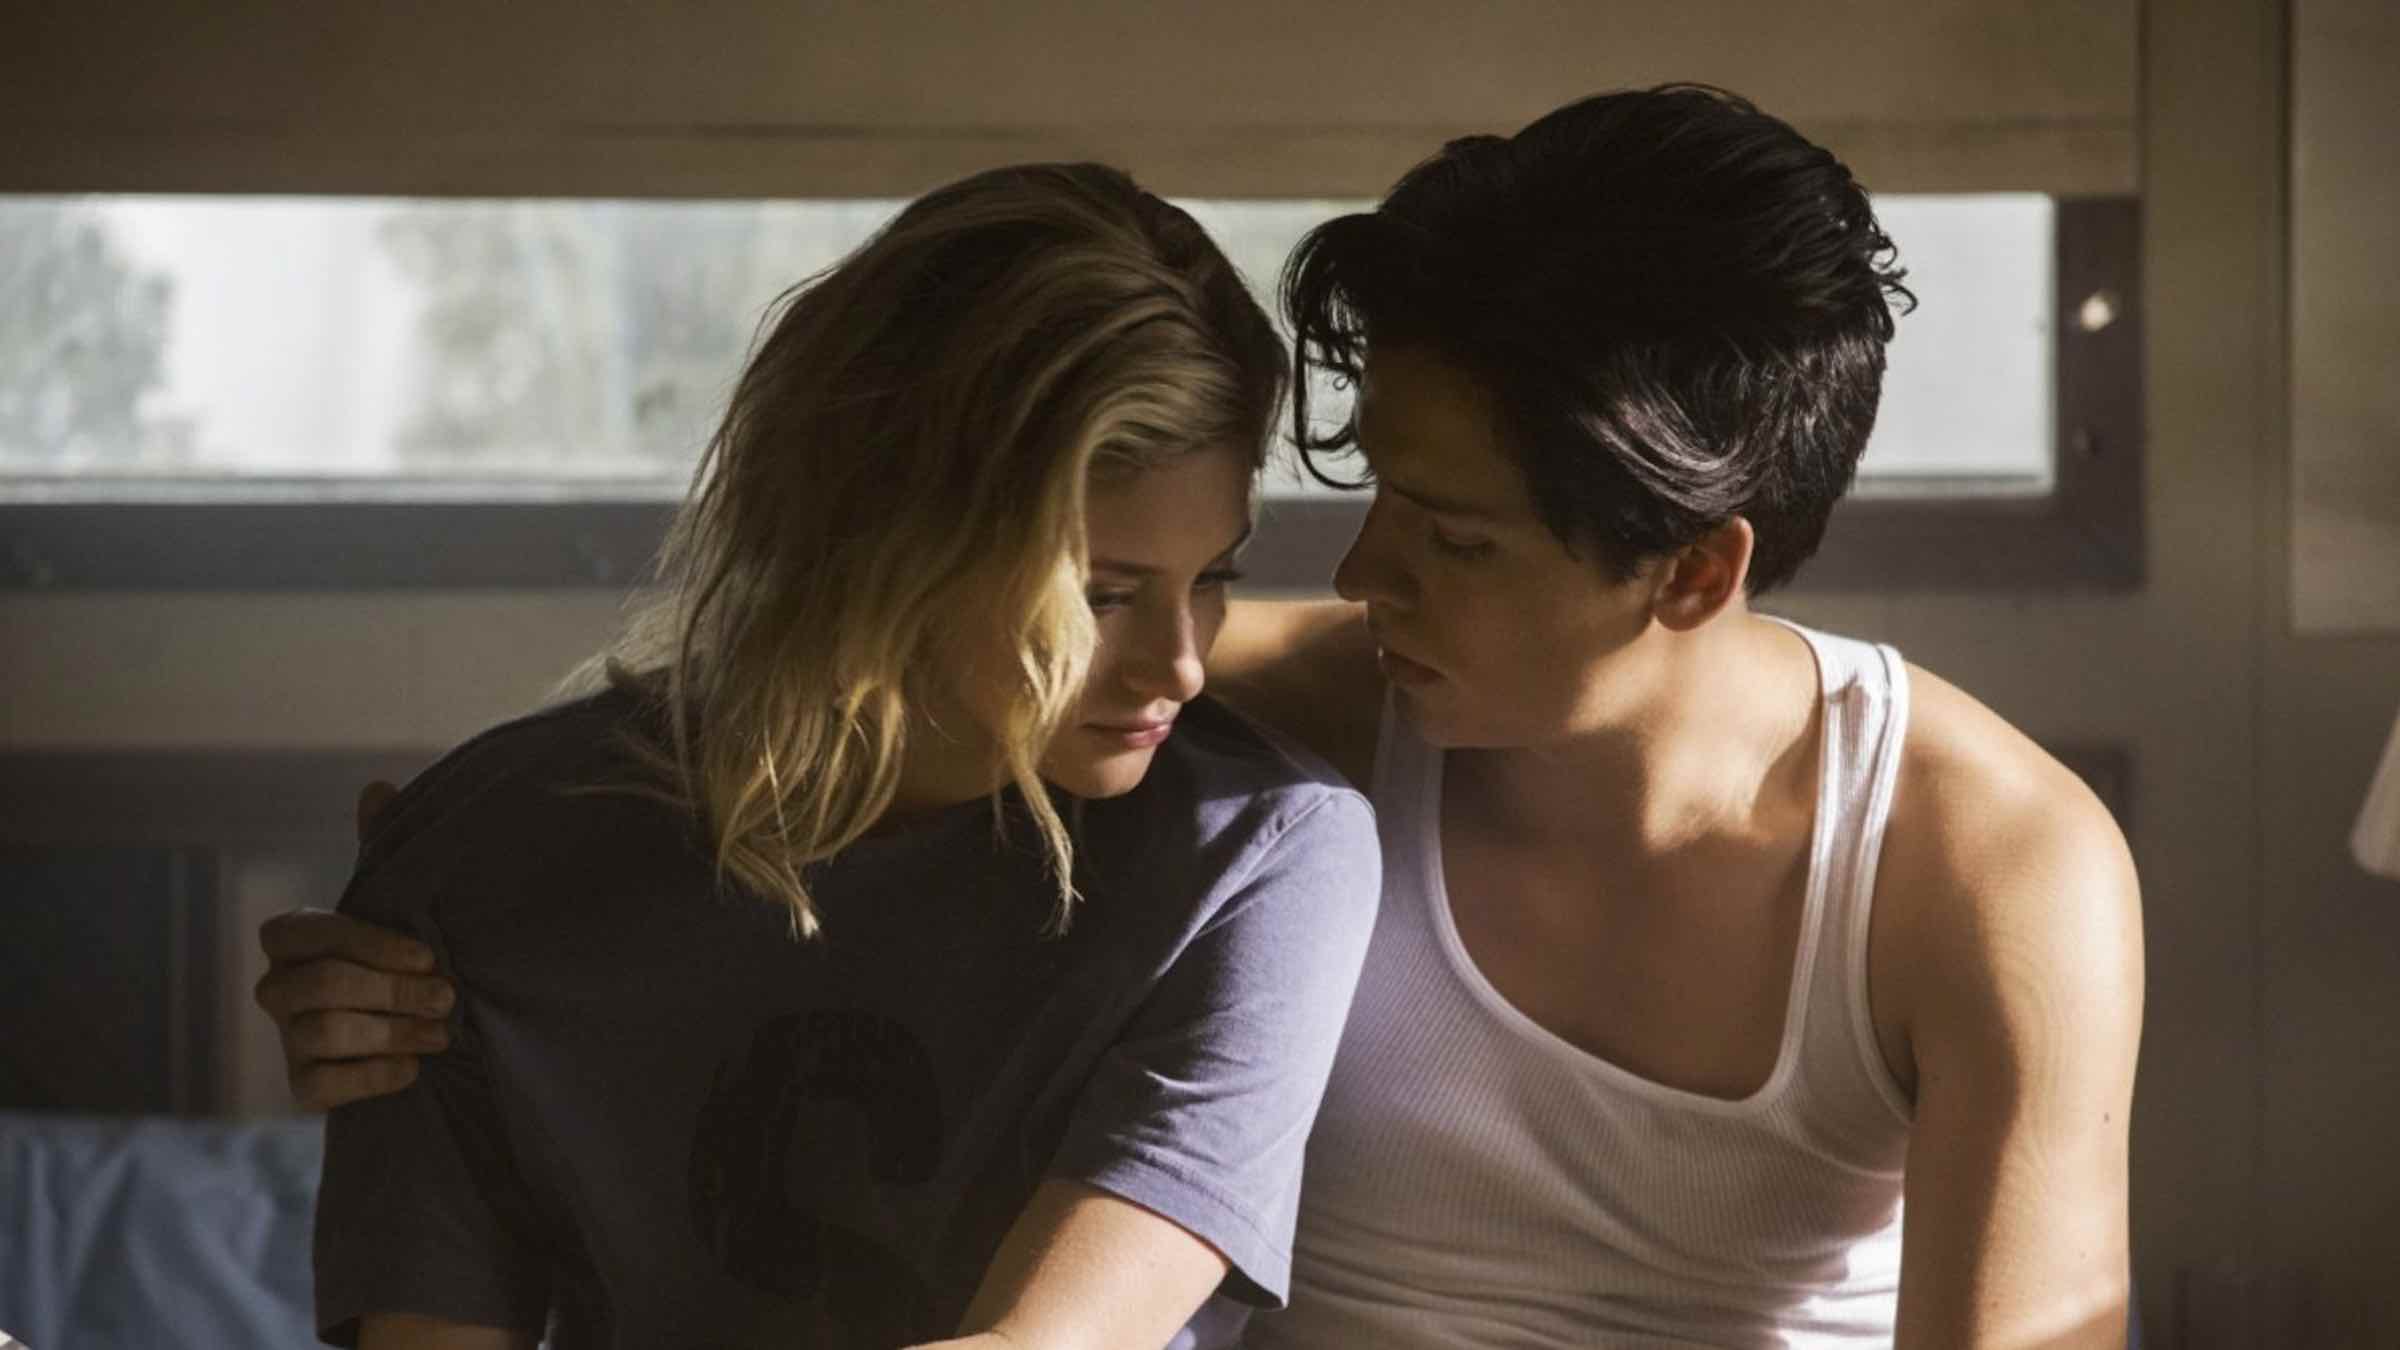 Let’s go back to happier times and avoid high school drama with the ultimate 'Riverdale' Bughead quiz. Test yourself now!